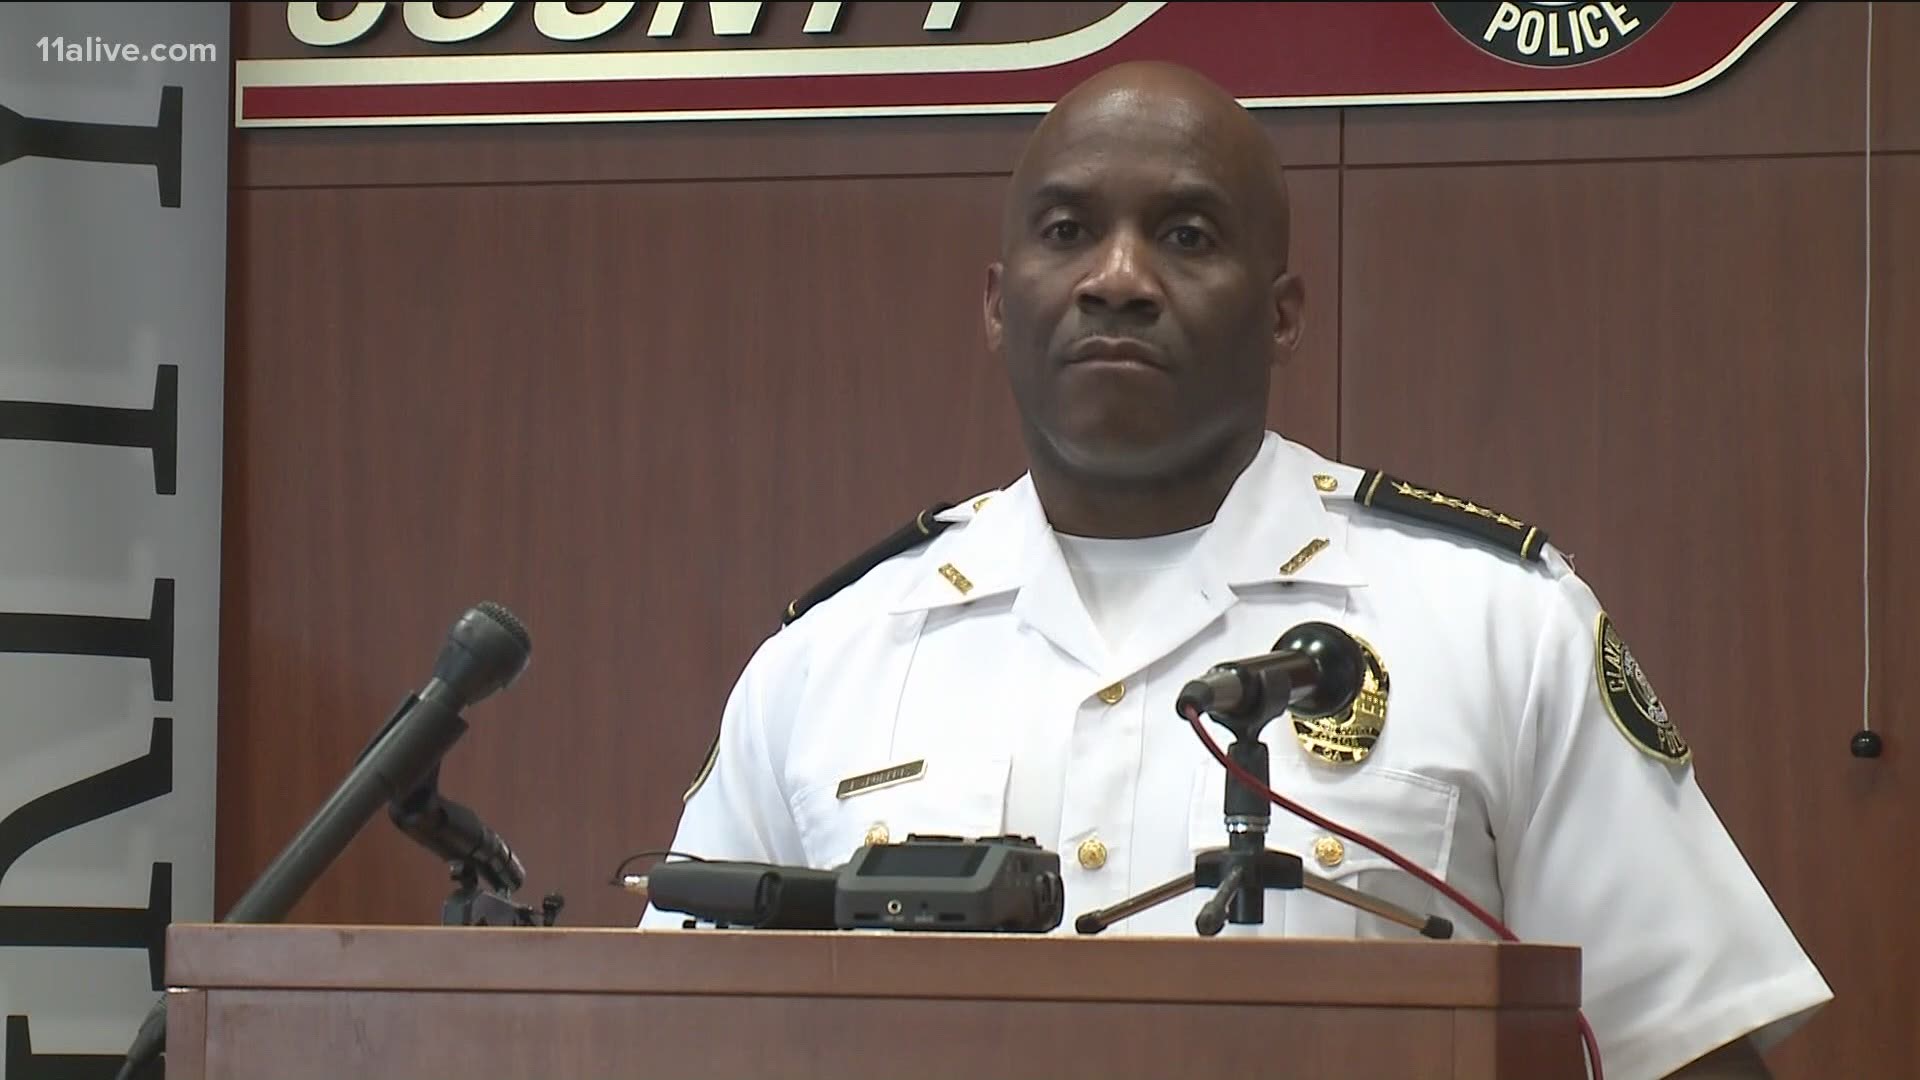 The chief said the officer acted accordingly based on the information he had at the time and worked to de-escalate the situation once involved.